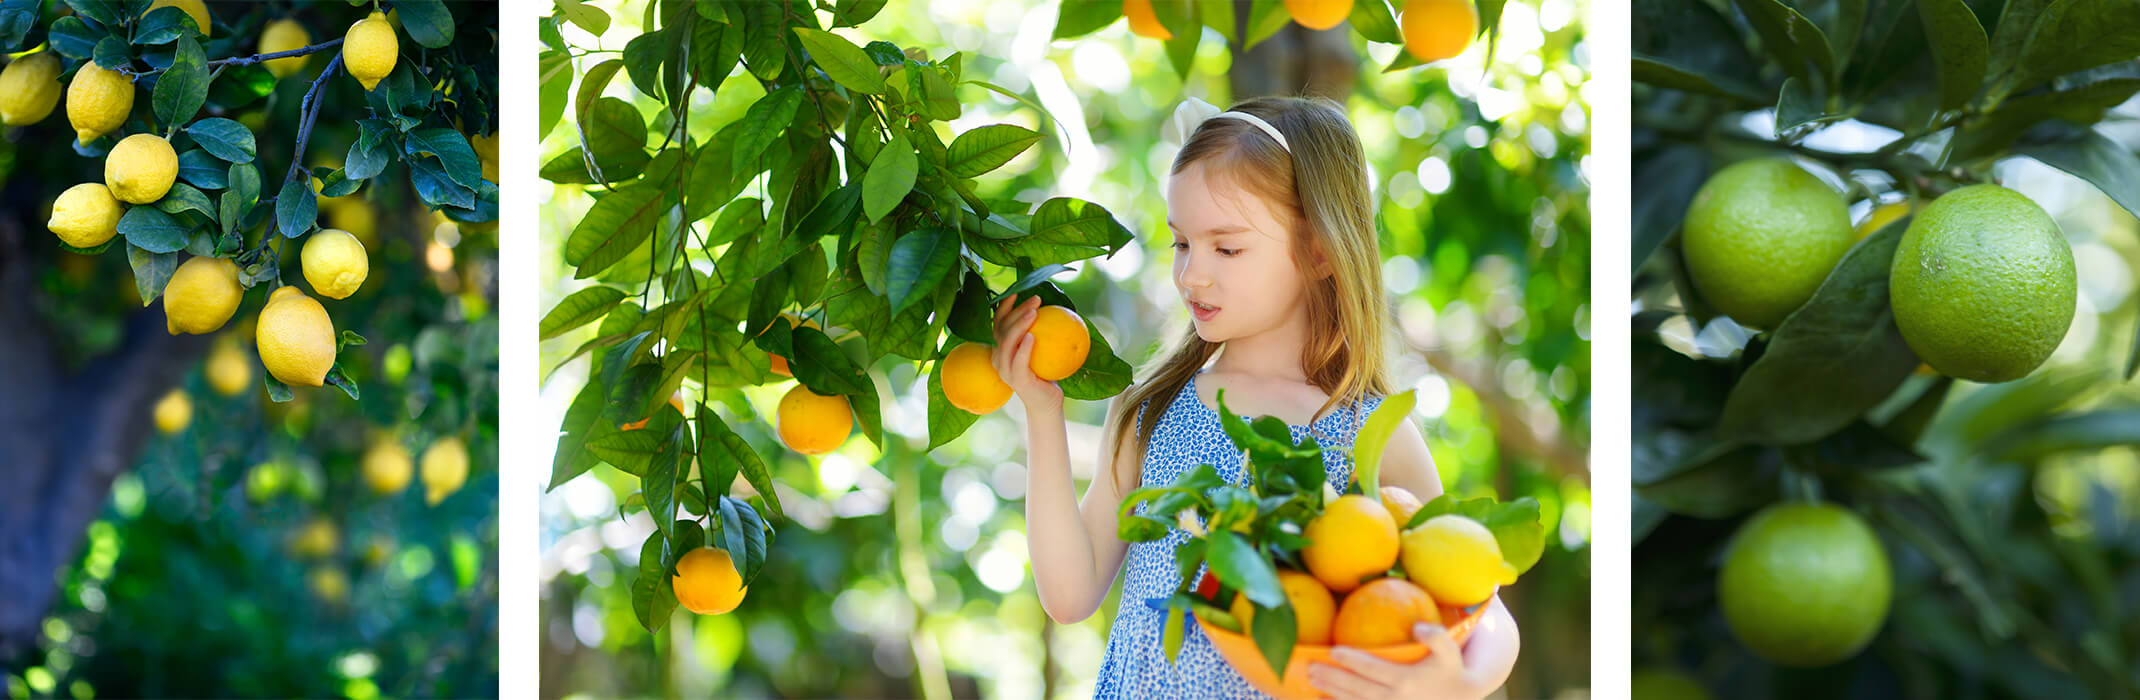 A collage of 3 images: a lemon tree, a young girl picking oranges, and limes on a tree